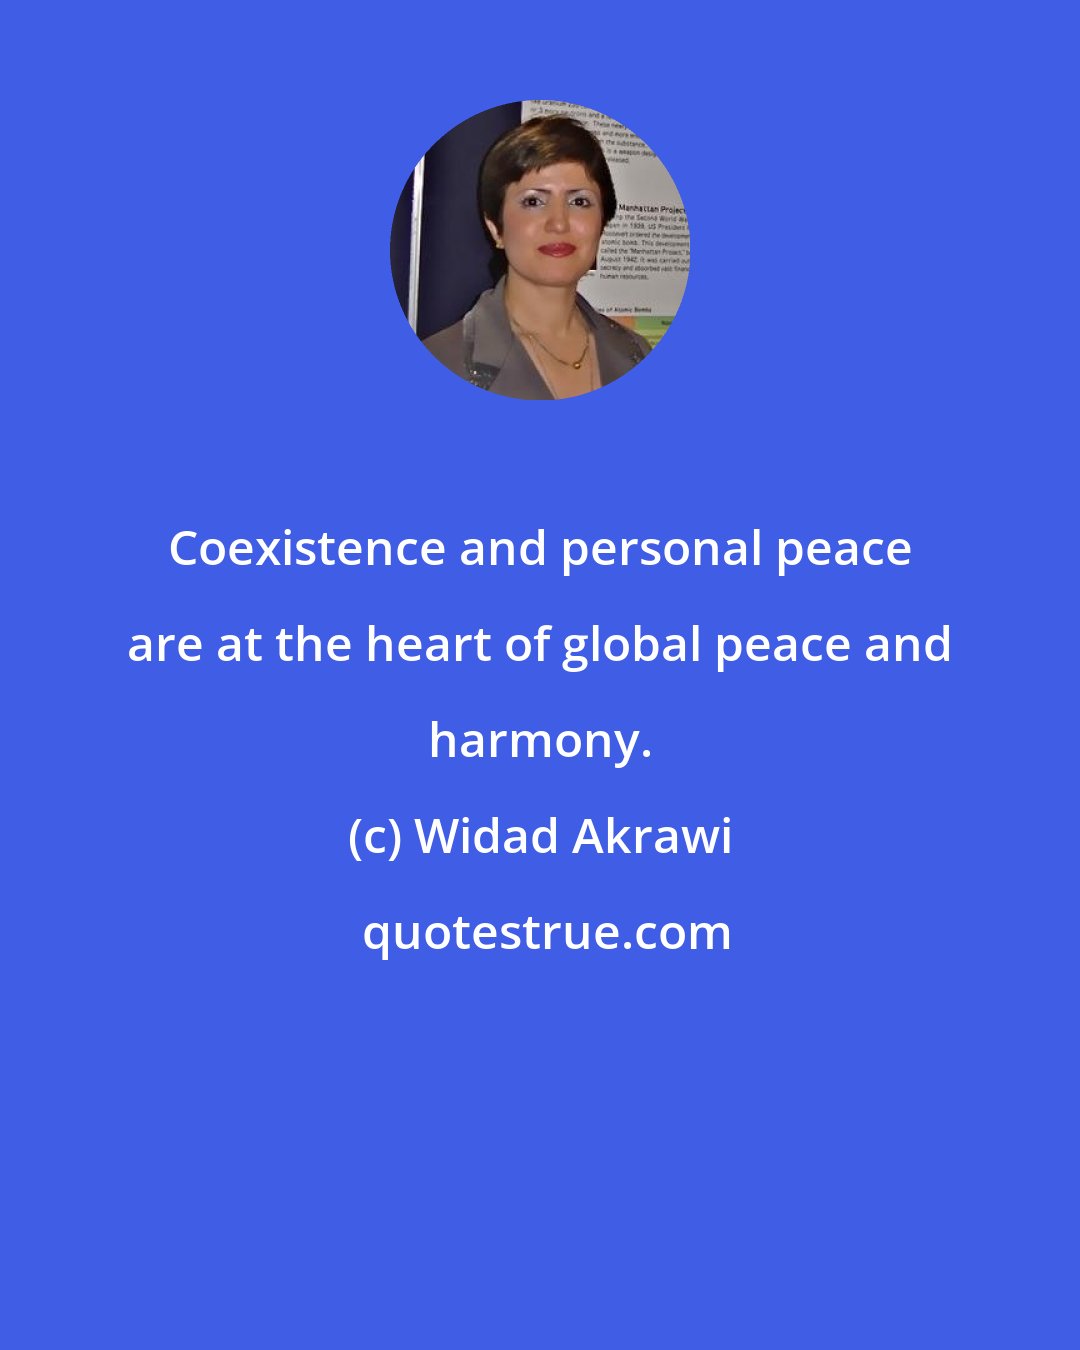 Widad Akrawi: Coexistence and personal peace are at the heart of global peace and harmony.